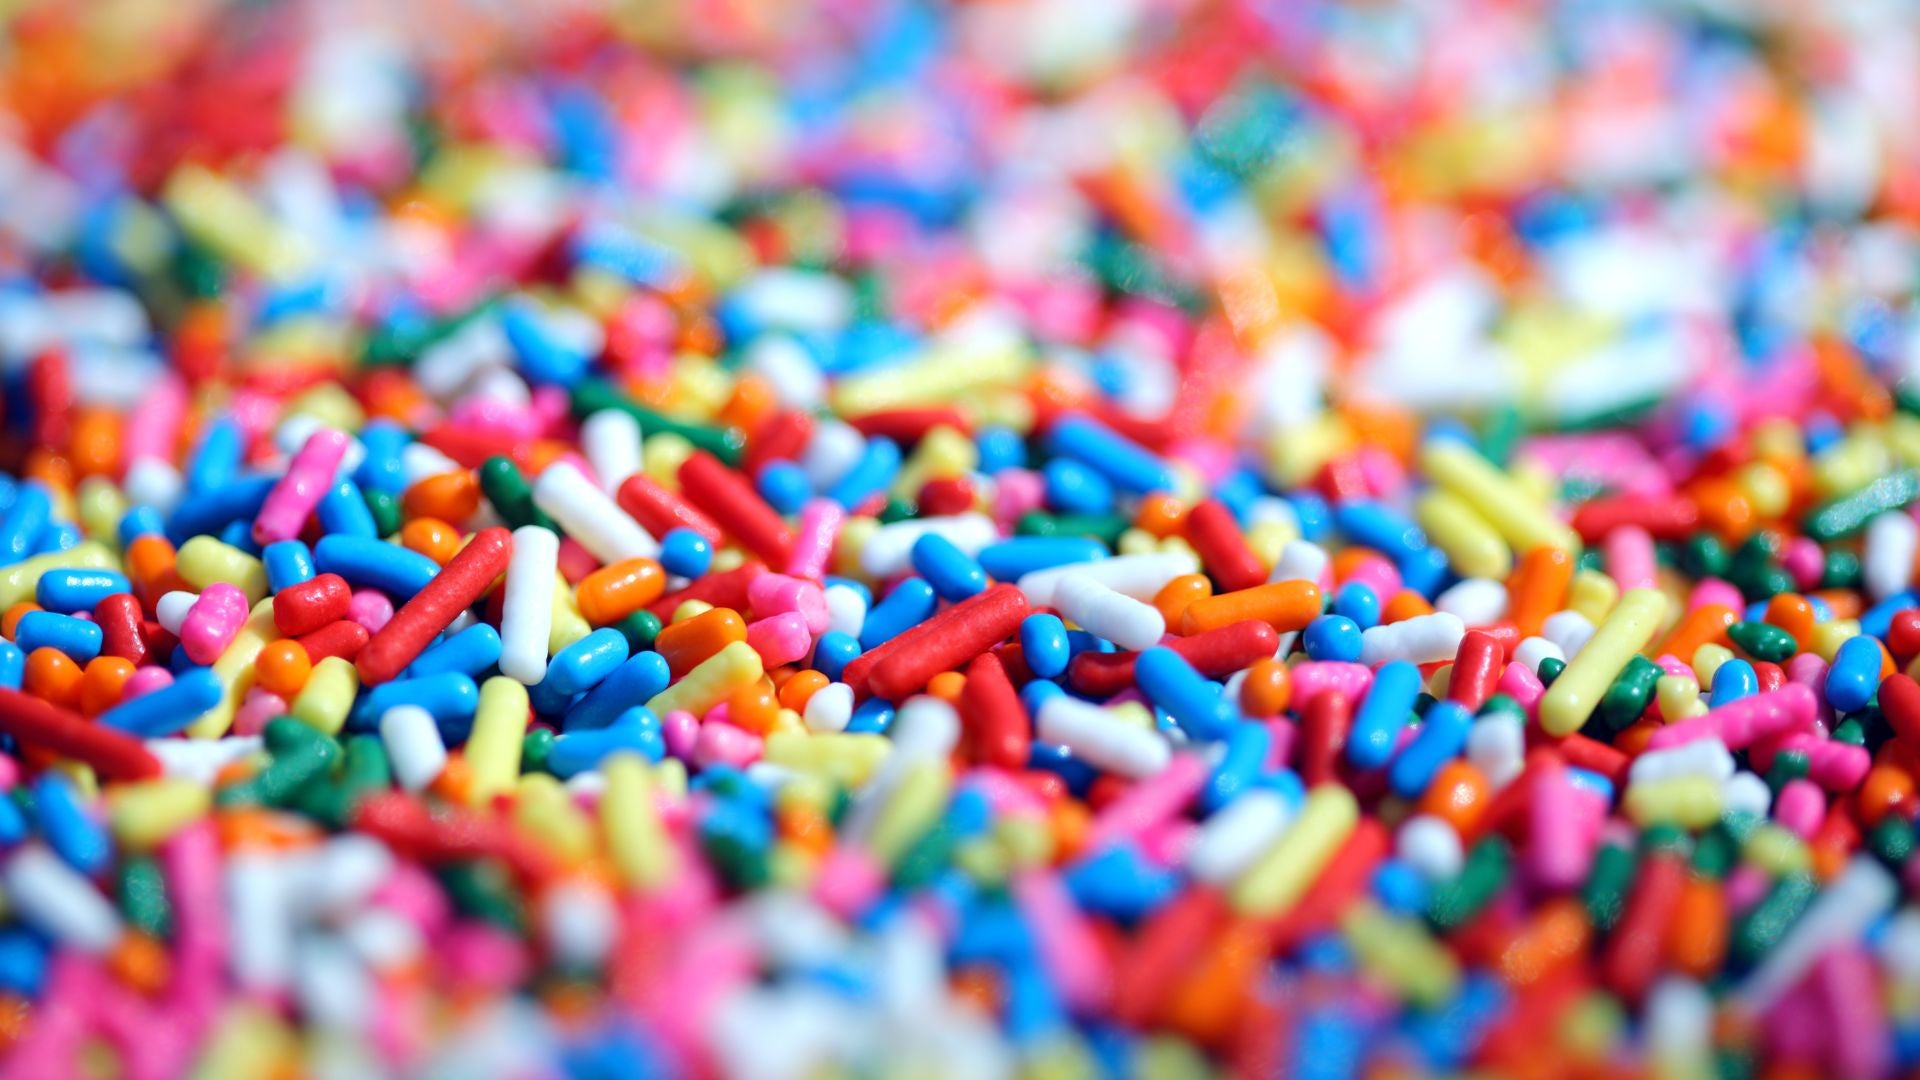 Cake Sprinkles Guide: All About Sprinkles